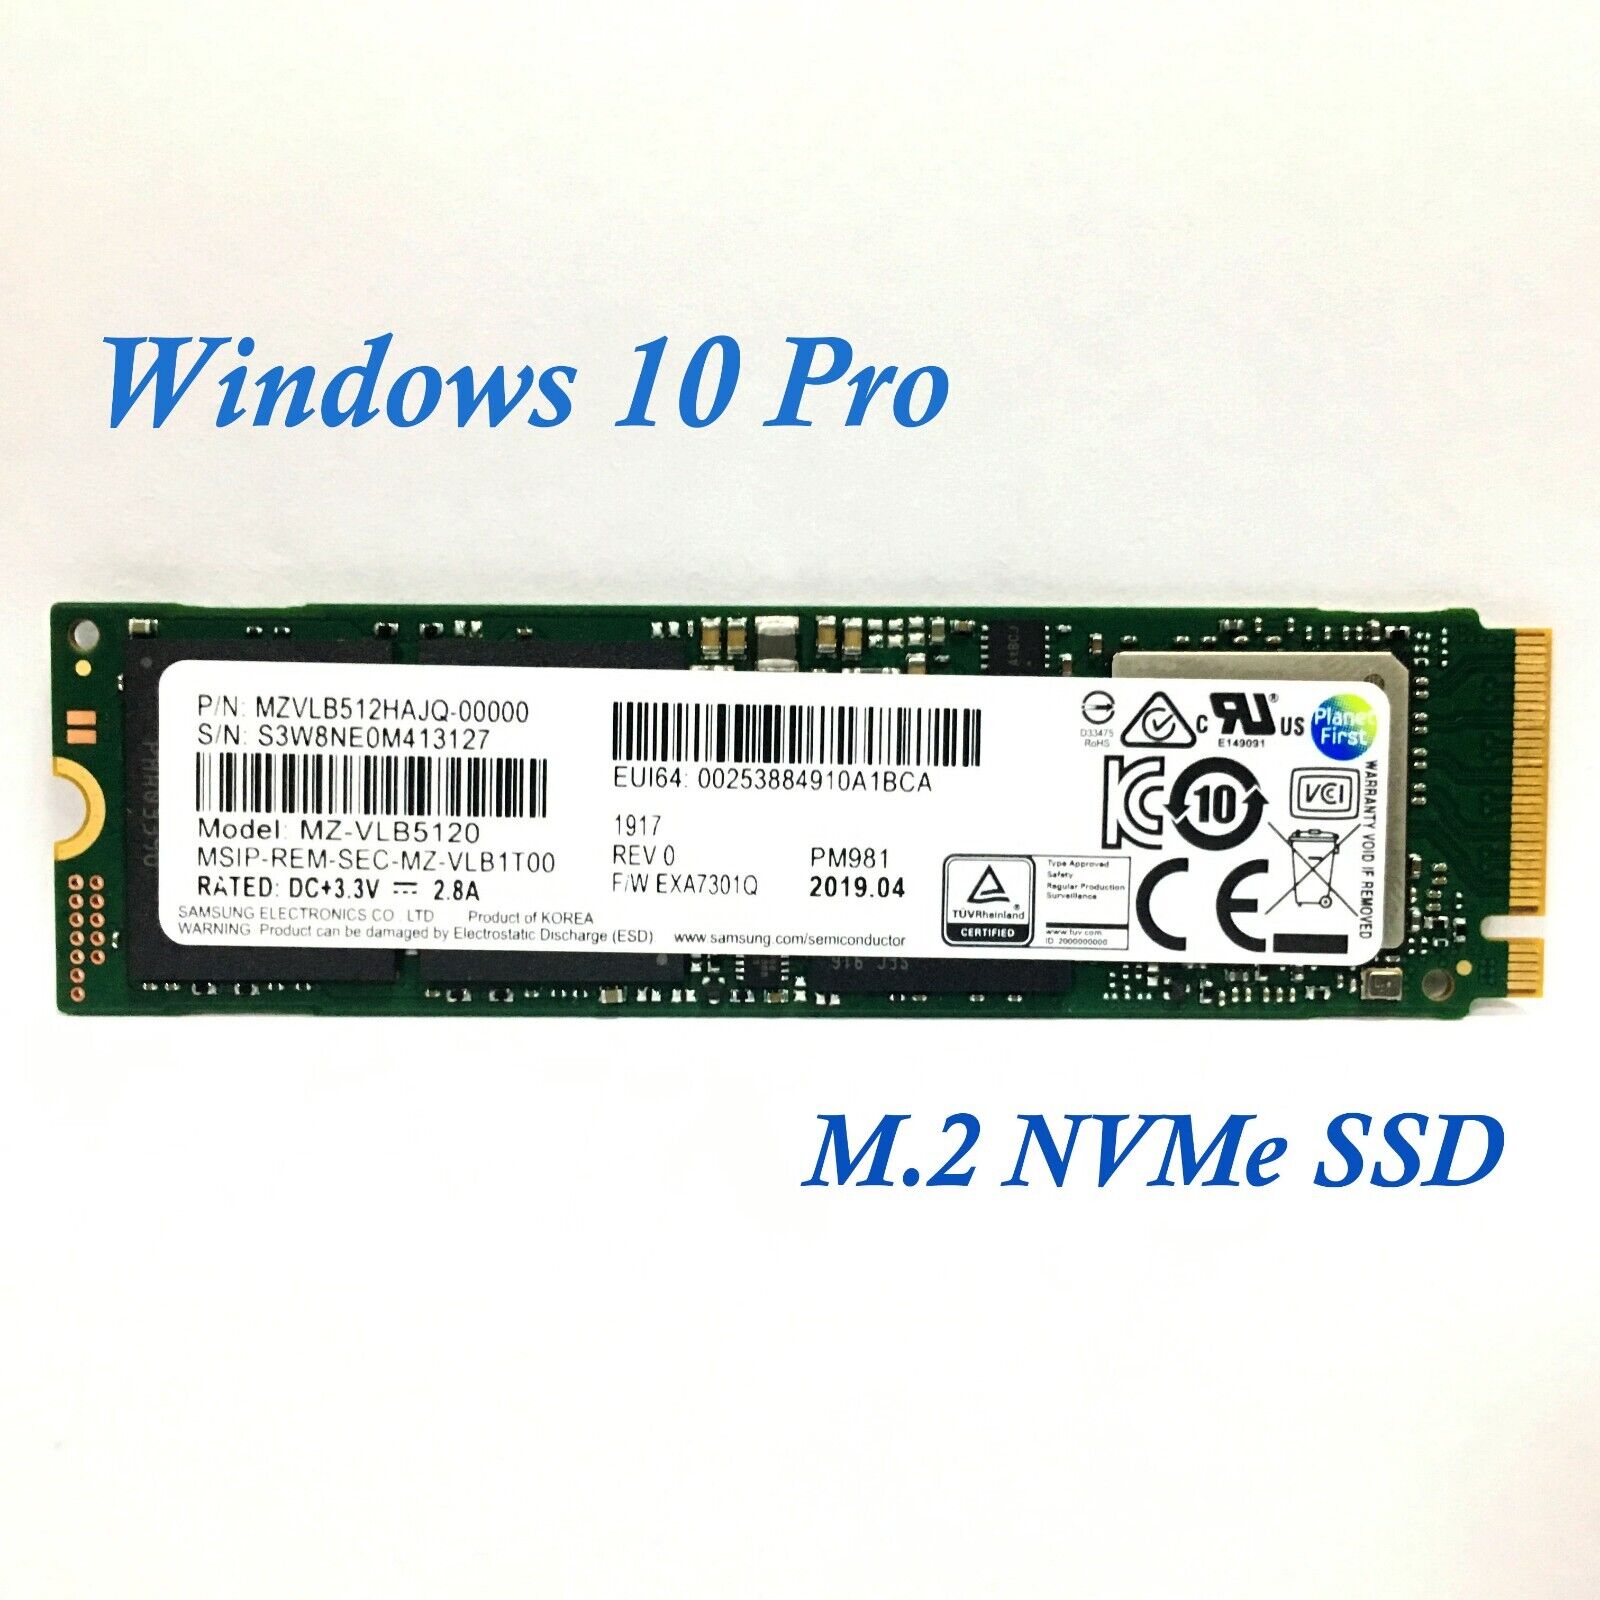 Lenovo Samsung 512GB NVMe M.2 SSD Solid State with Windows 10 Pro Installed